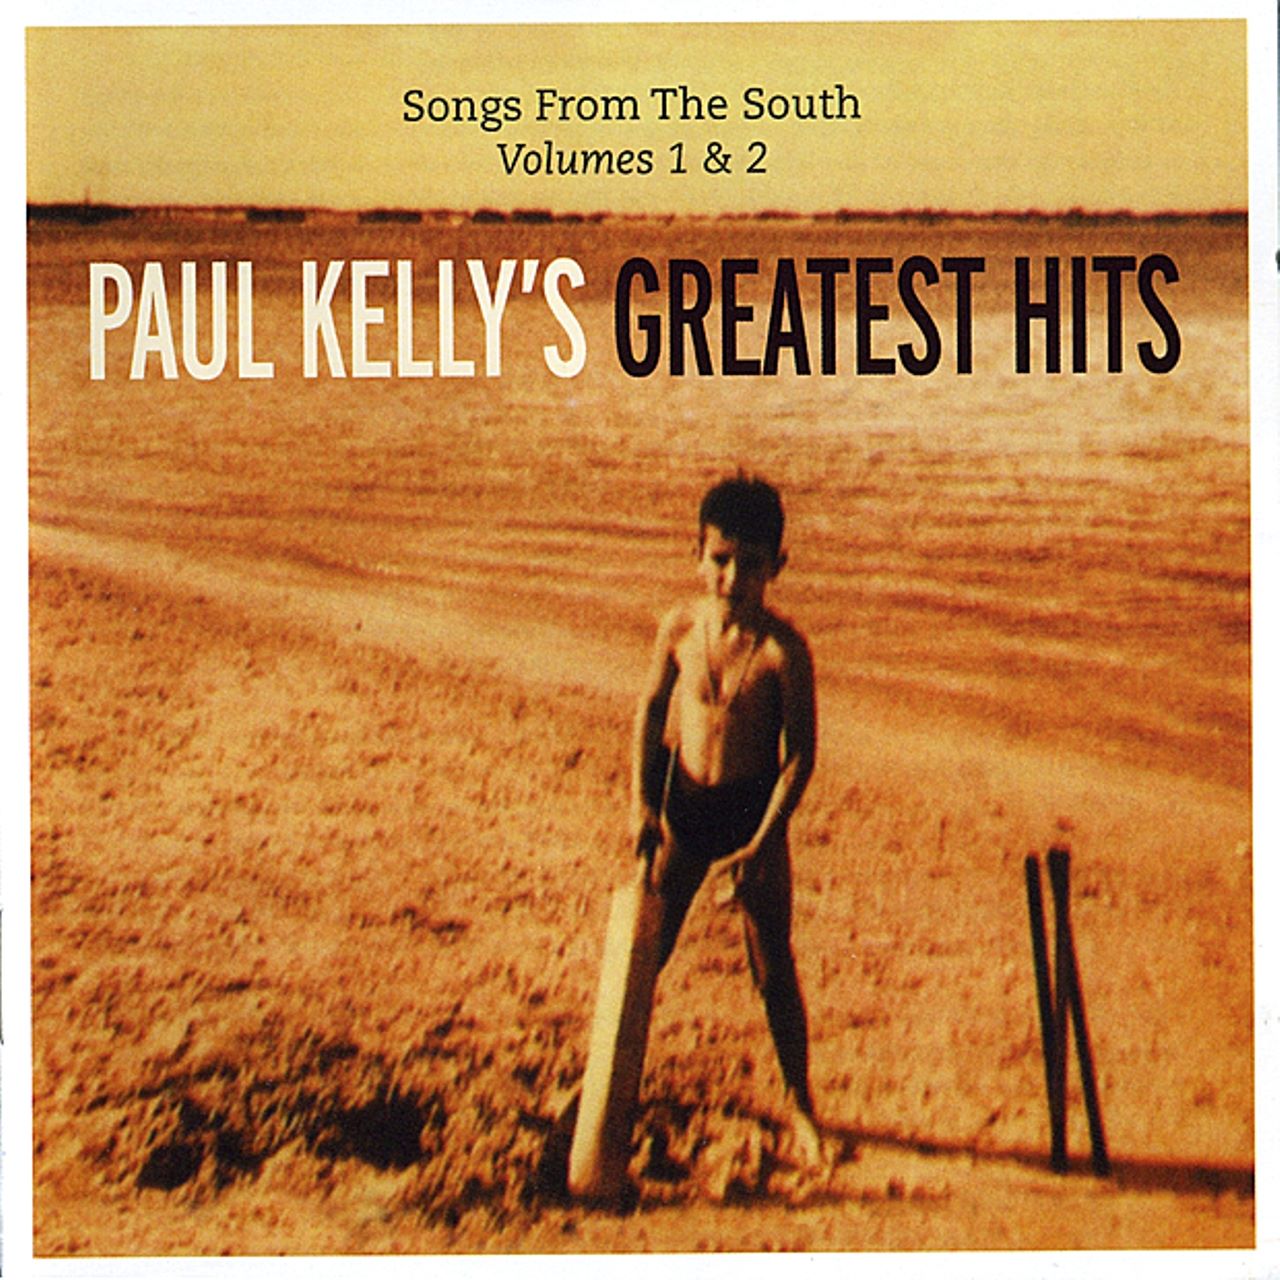 Paul Kelly - Greatest Hits - Songs From The South Volumes 1 & 2 cover album